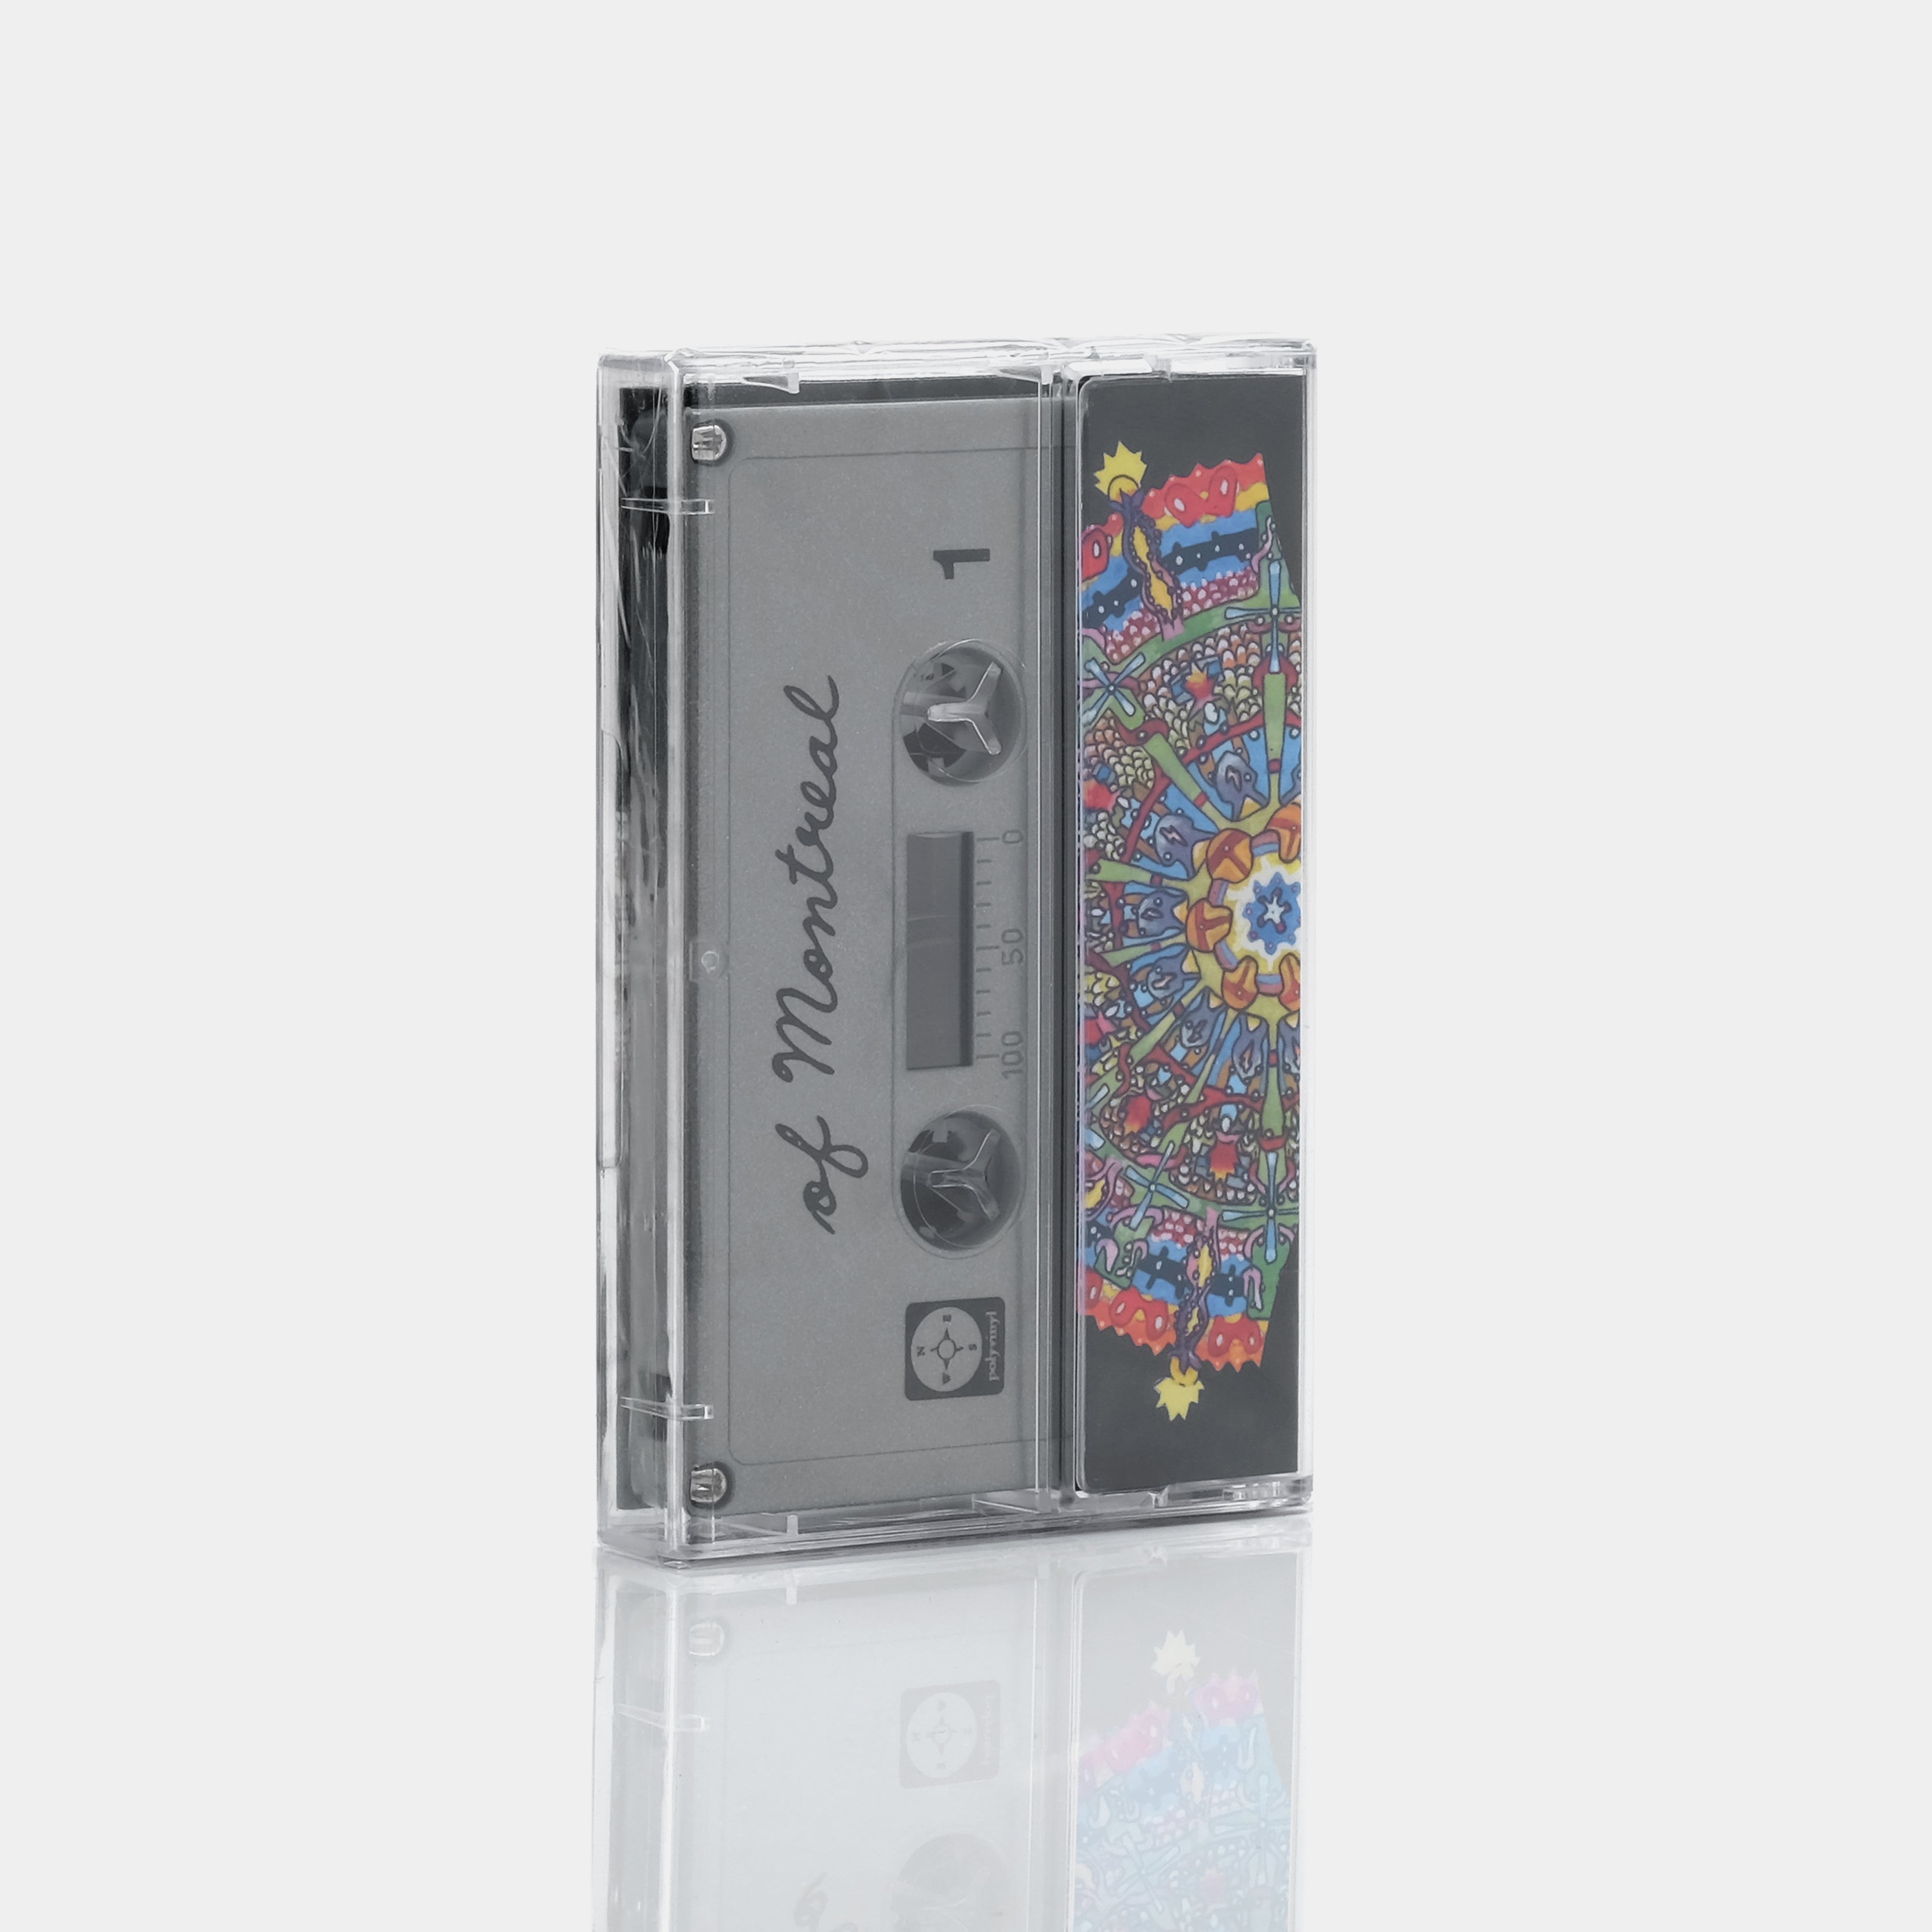 Of Montreal - Hissing Fauna, Are You The Destroyer? Cassette Tape